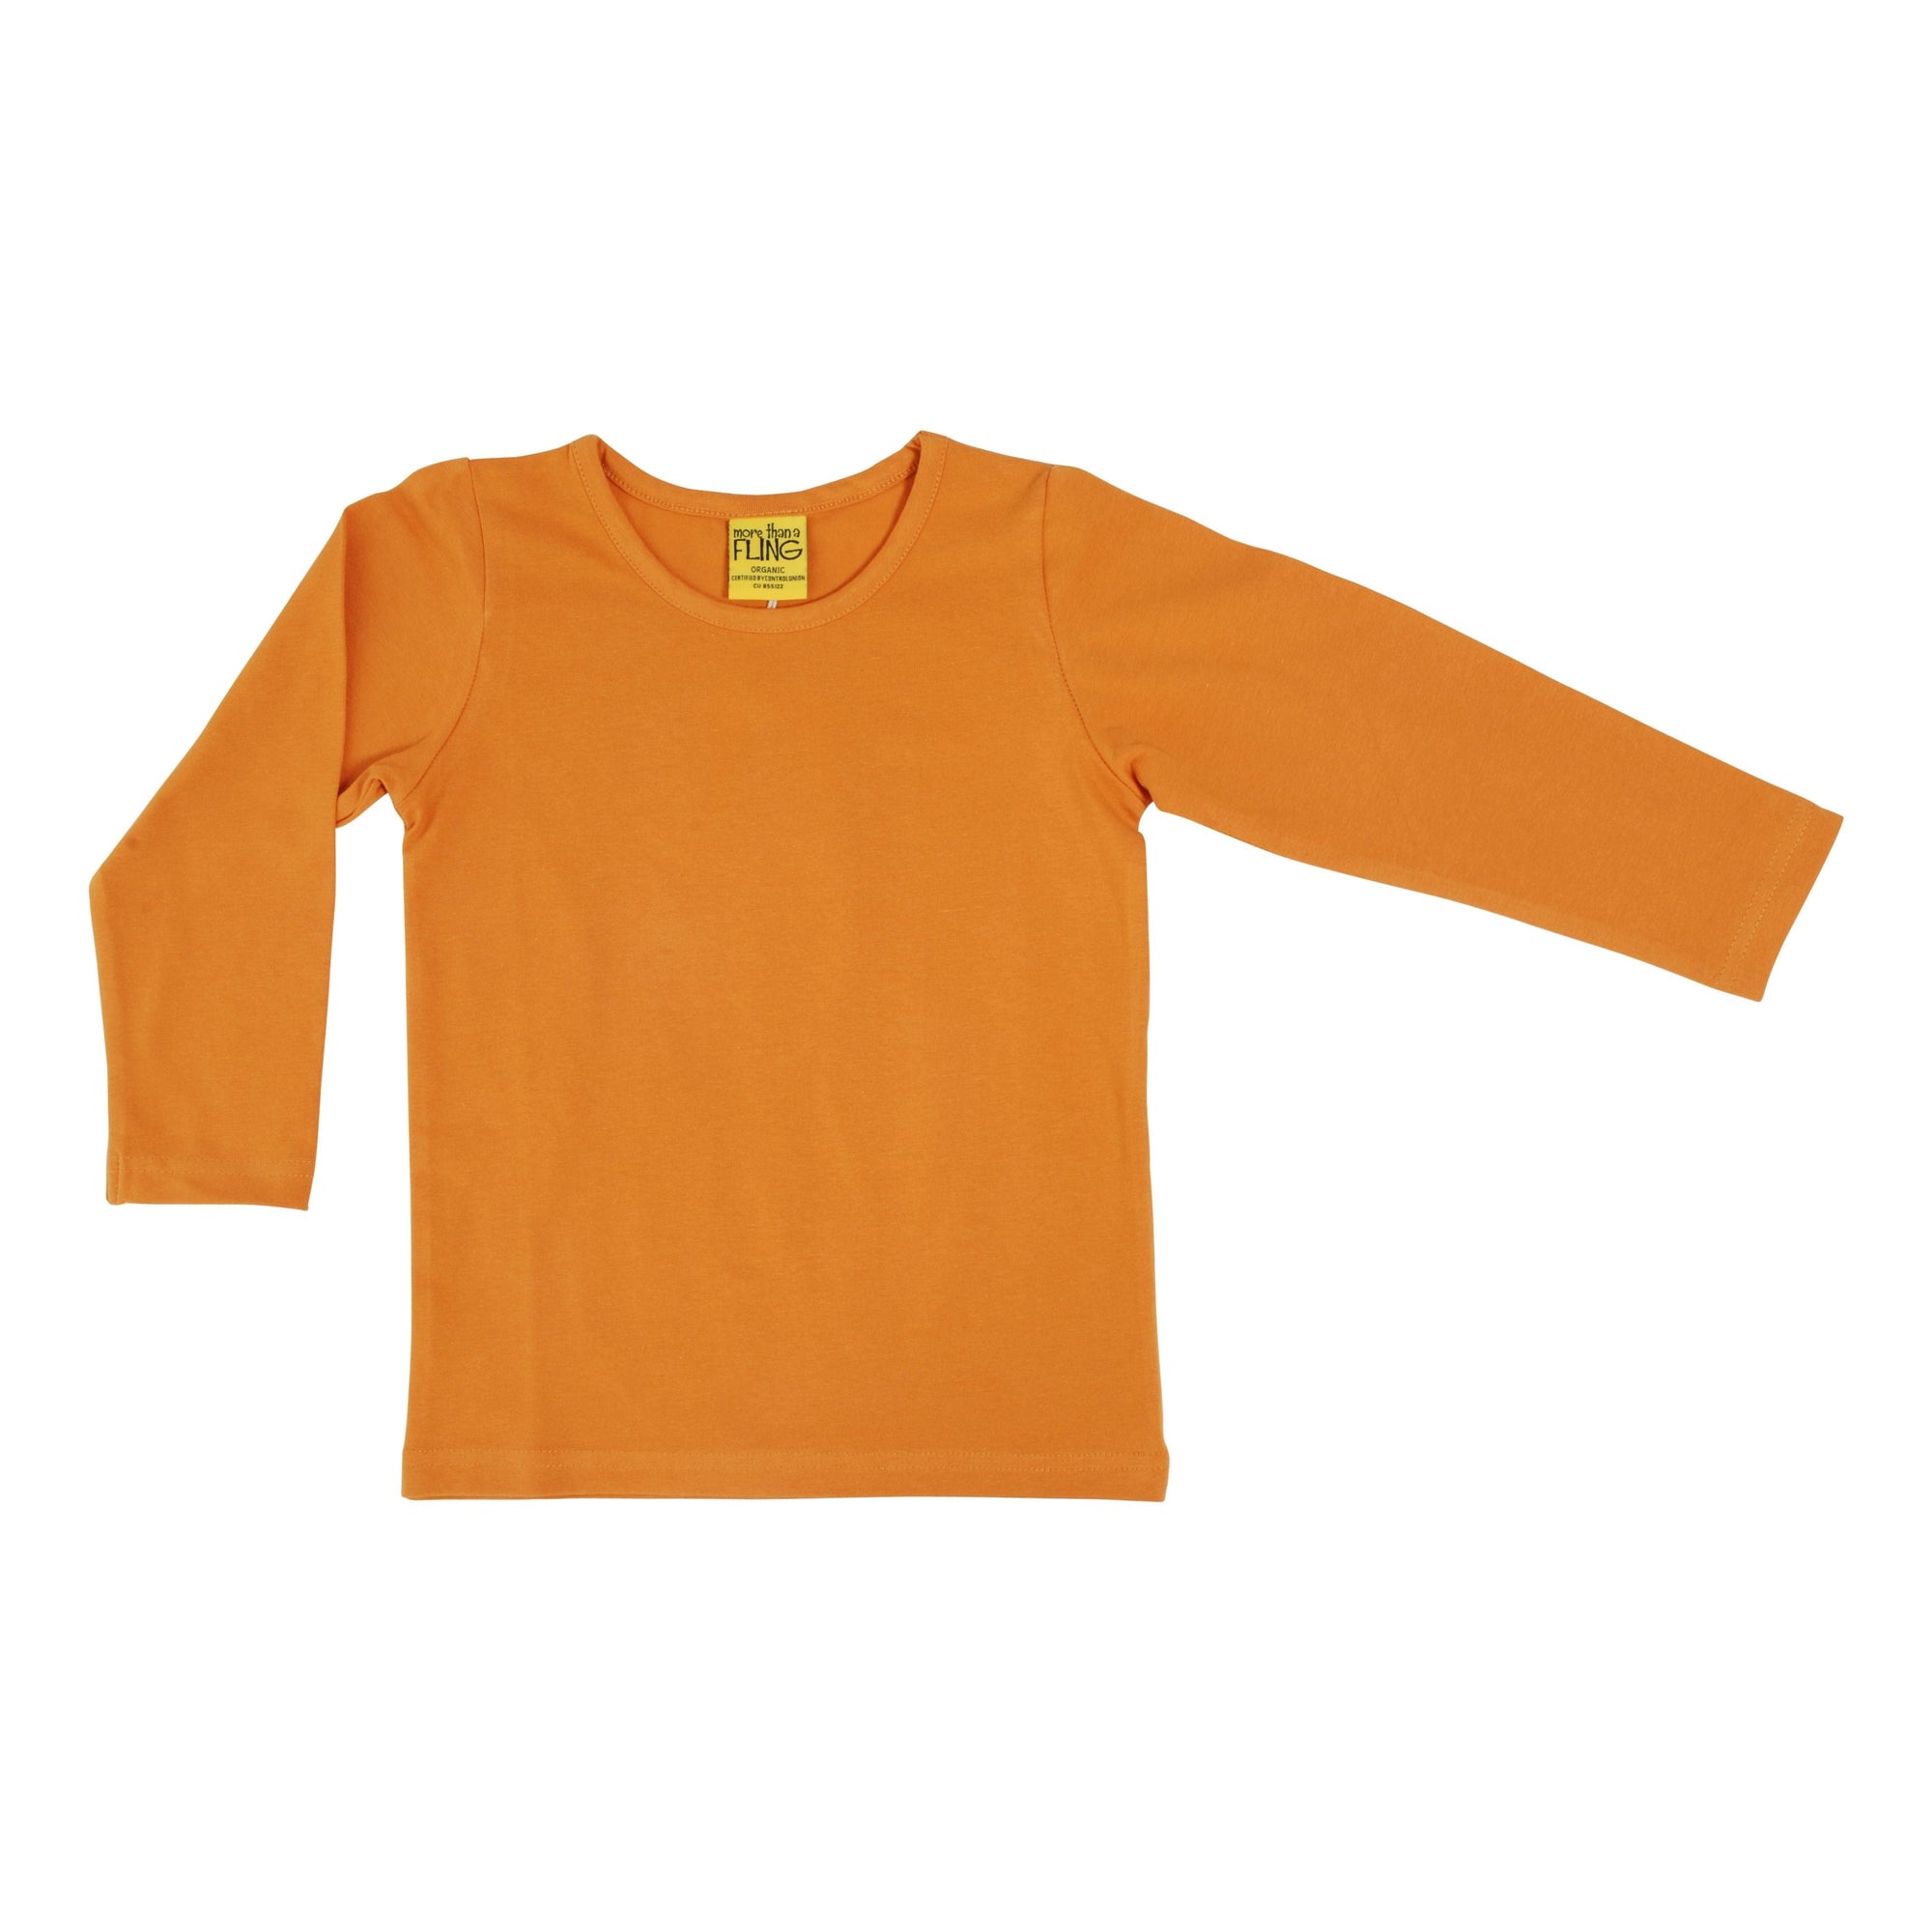 Yam Long Sleeve Shirt - 1 Left size 12-14 years-More Than A Fling-Modern Rascals